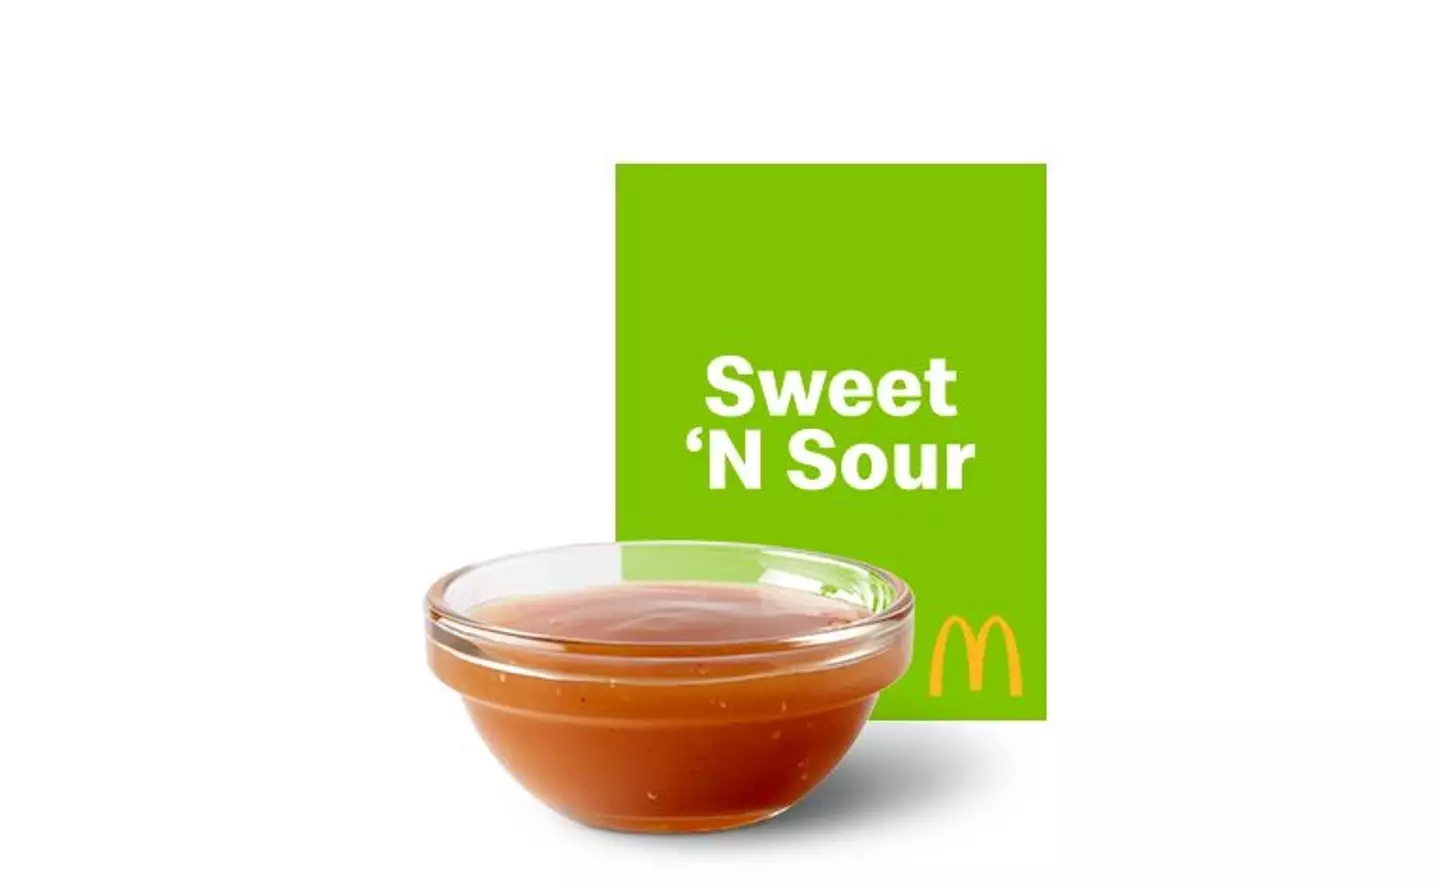 For many, the Sweet 'n' Sour sauce at McDonald's is a staple meal accompaniment.